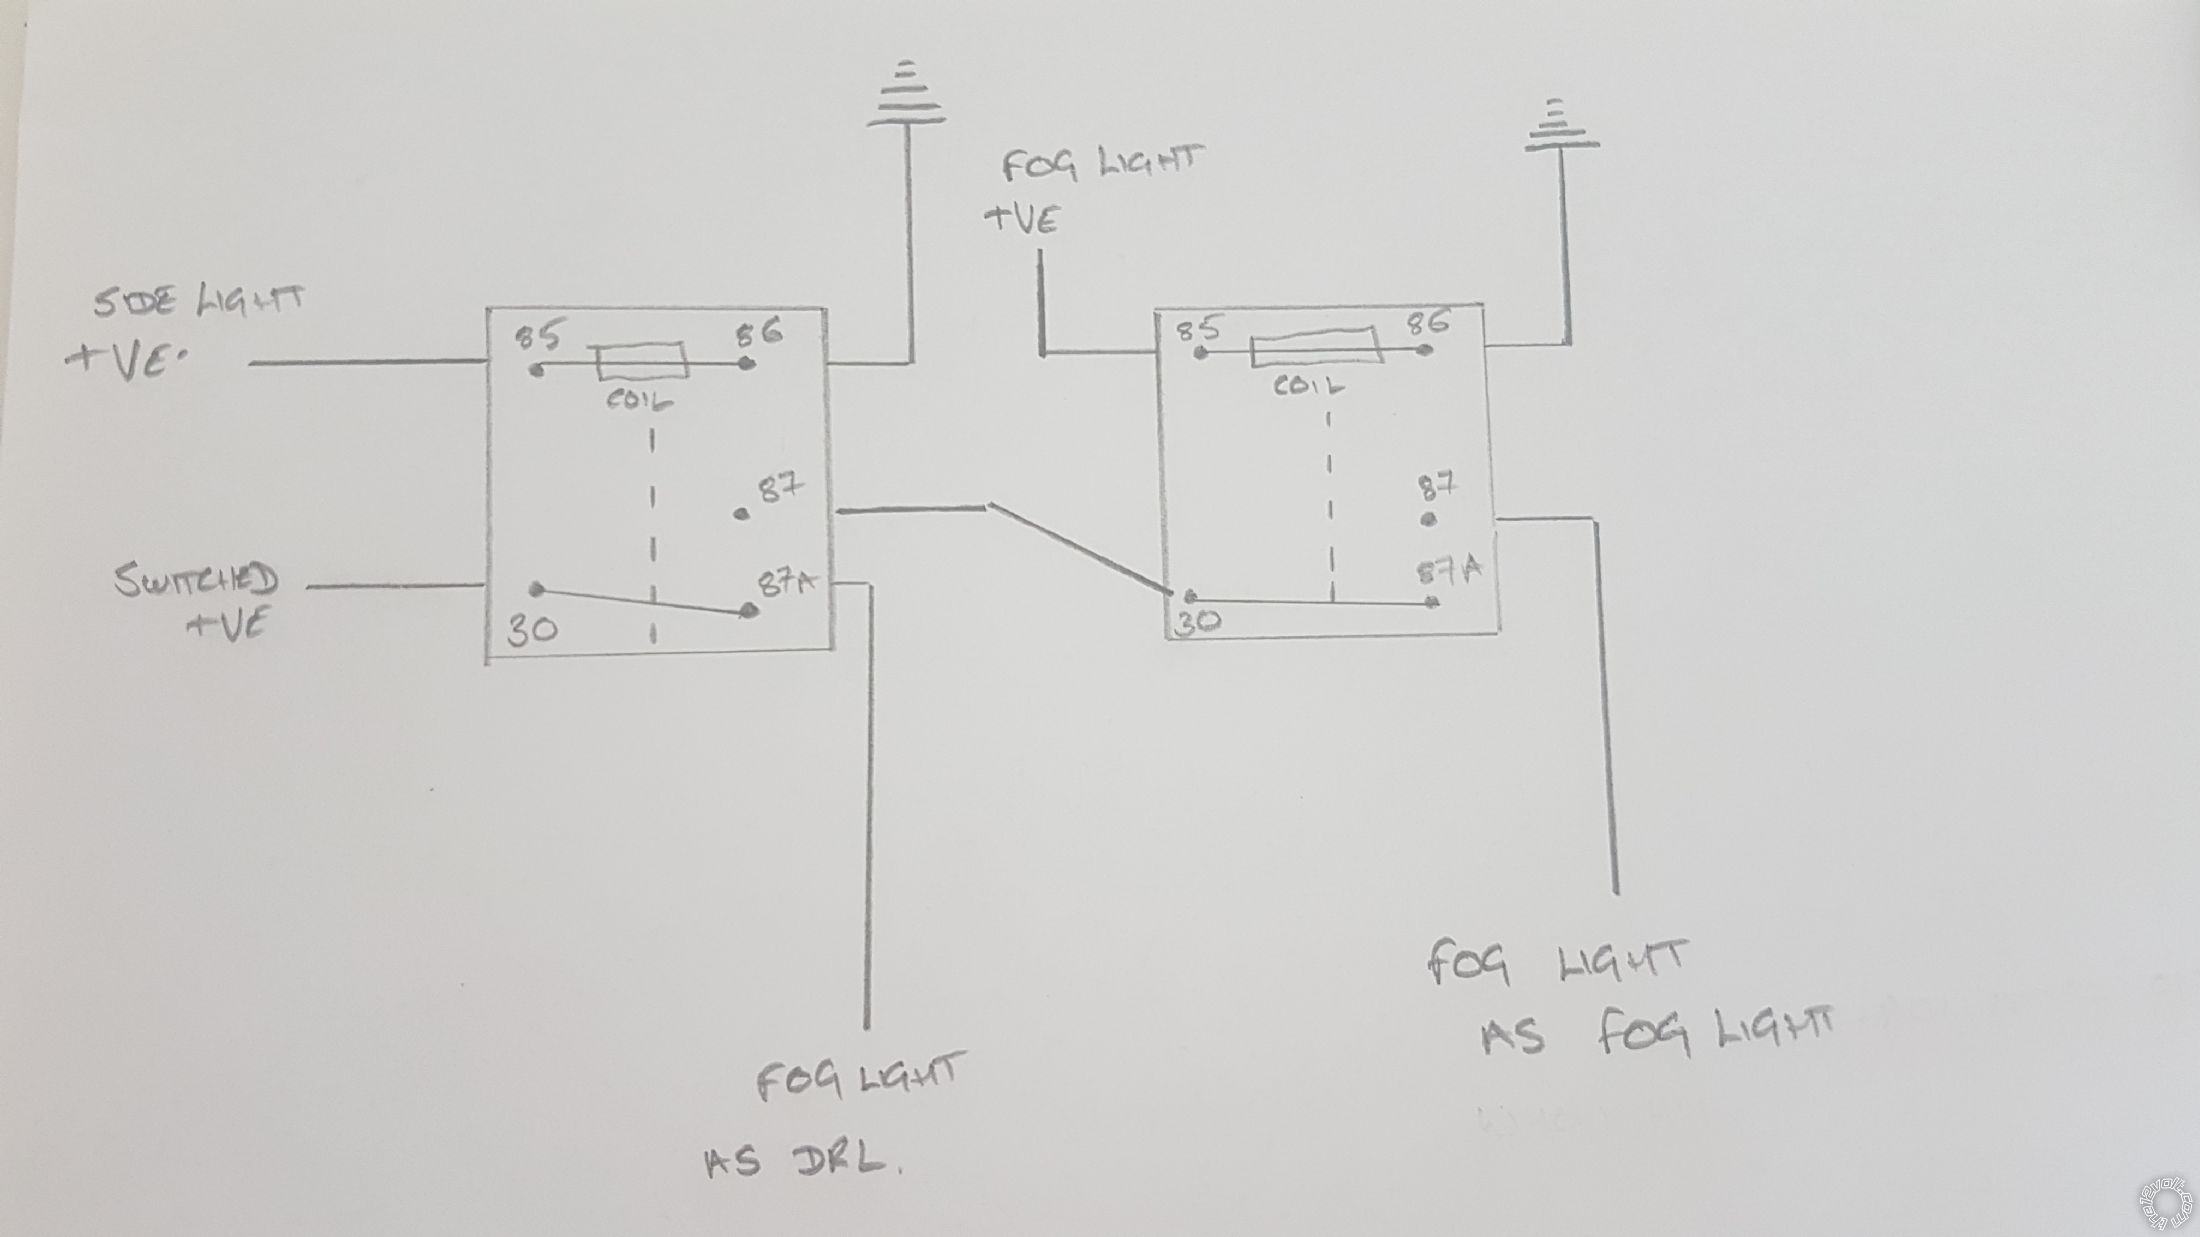 Triple Function Fog Light Relay Wiring -- posted image.